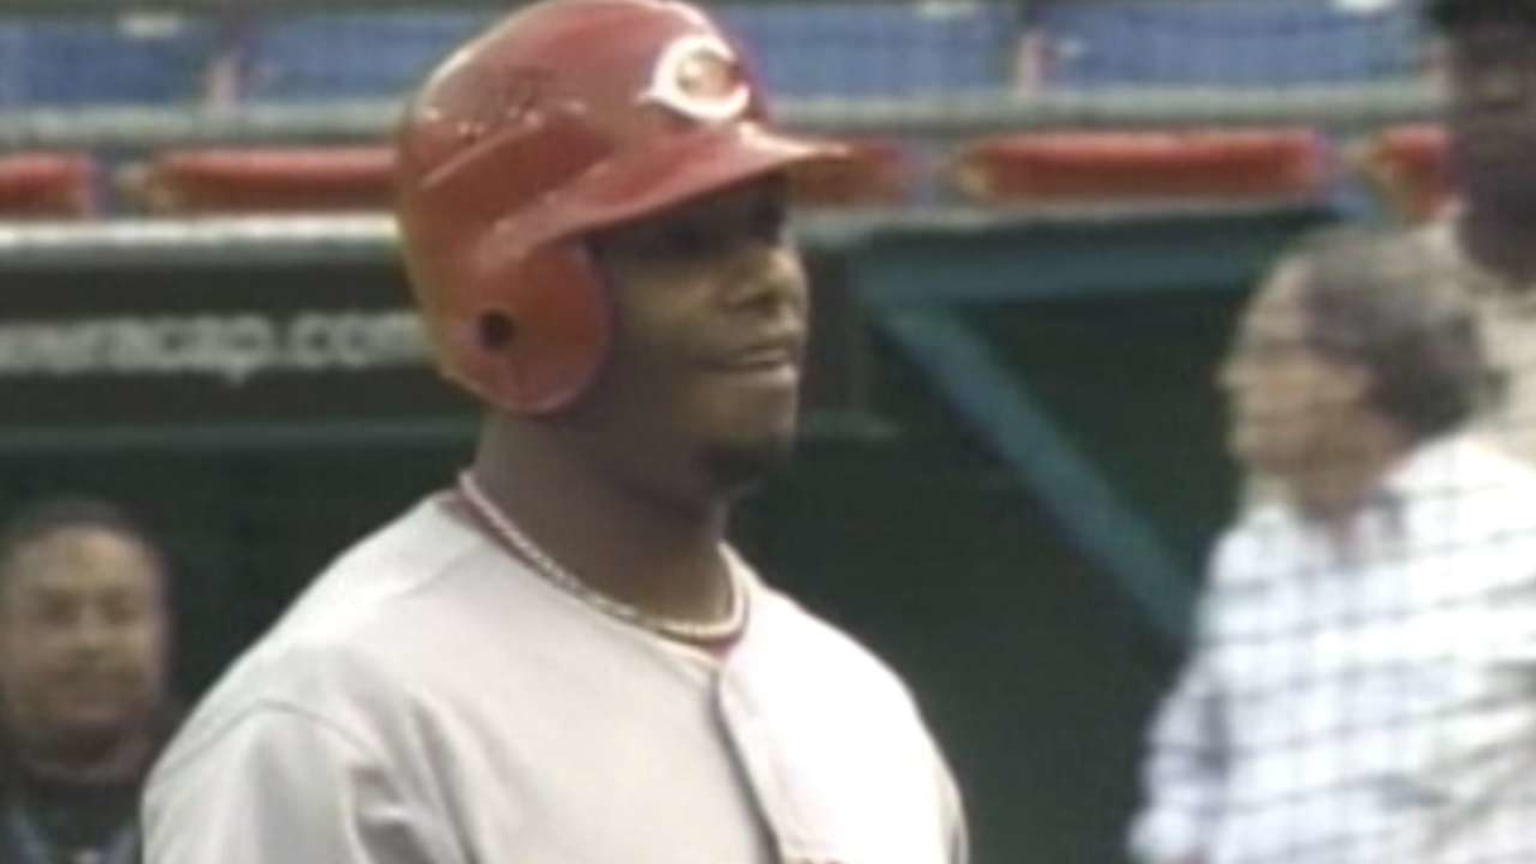 Today in History, June 9, 2008: Ken Griffey Jr. hits 600th home run